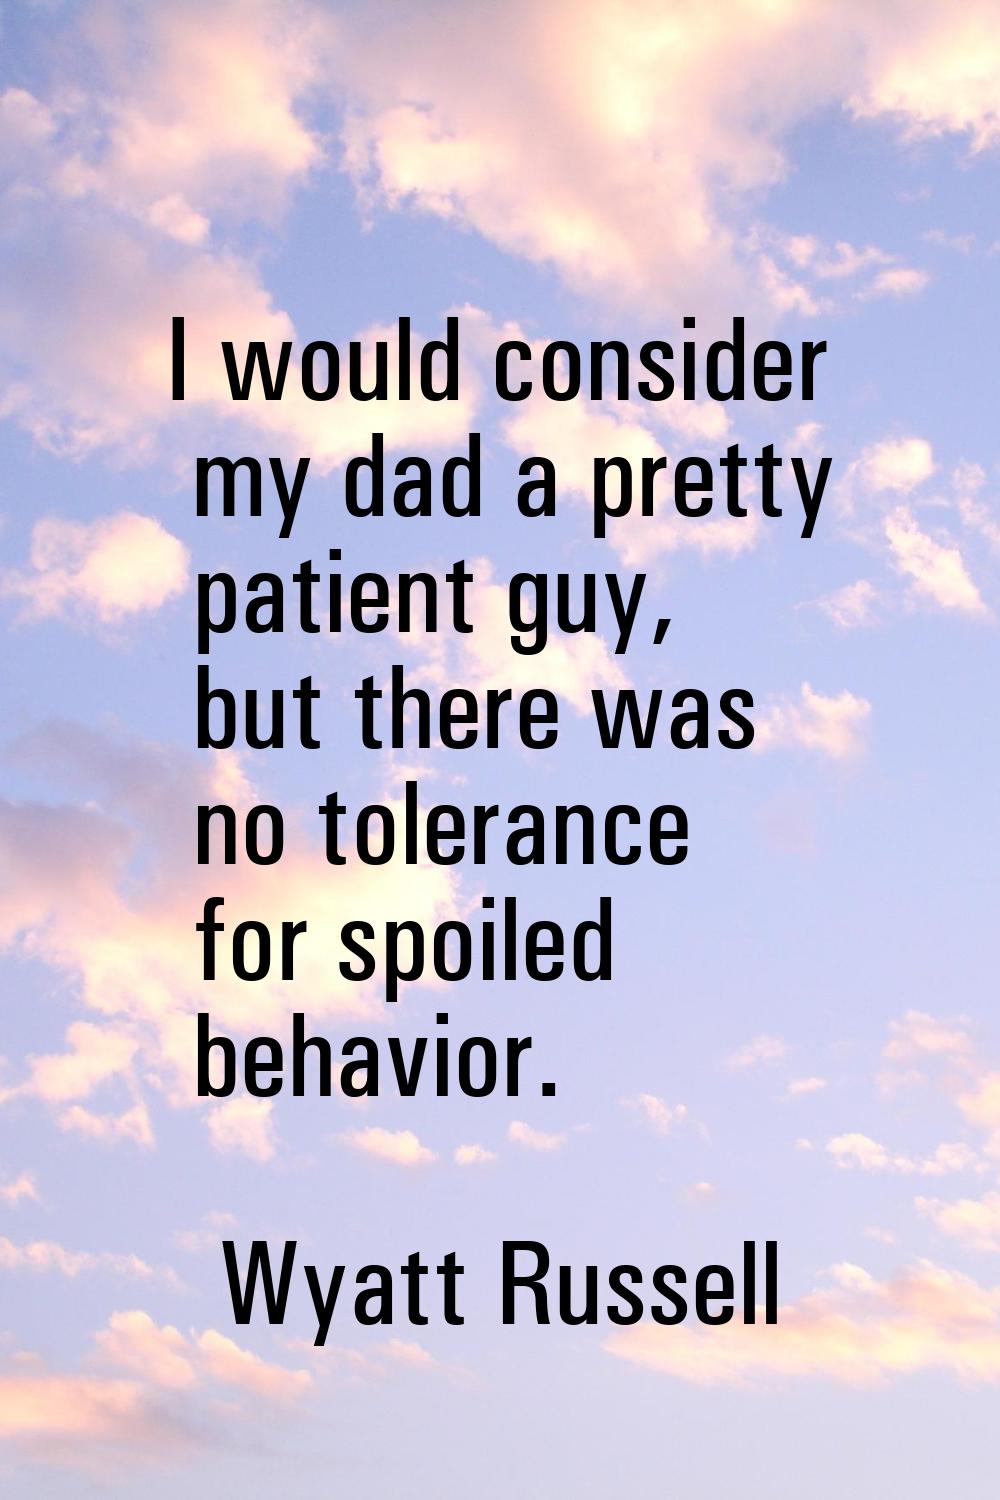 I would consider my dad a pretty patient guy, but there was no tolerance for spoiled behavior.